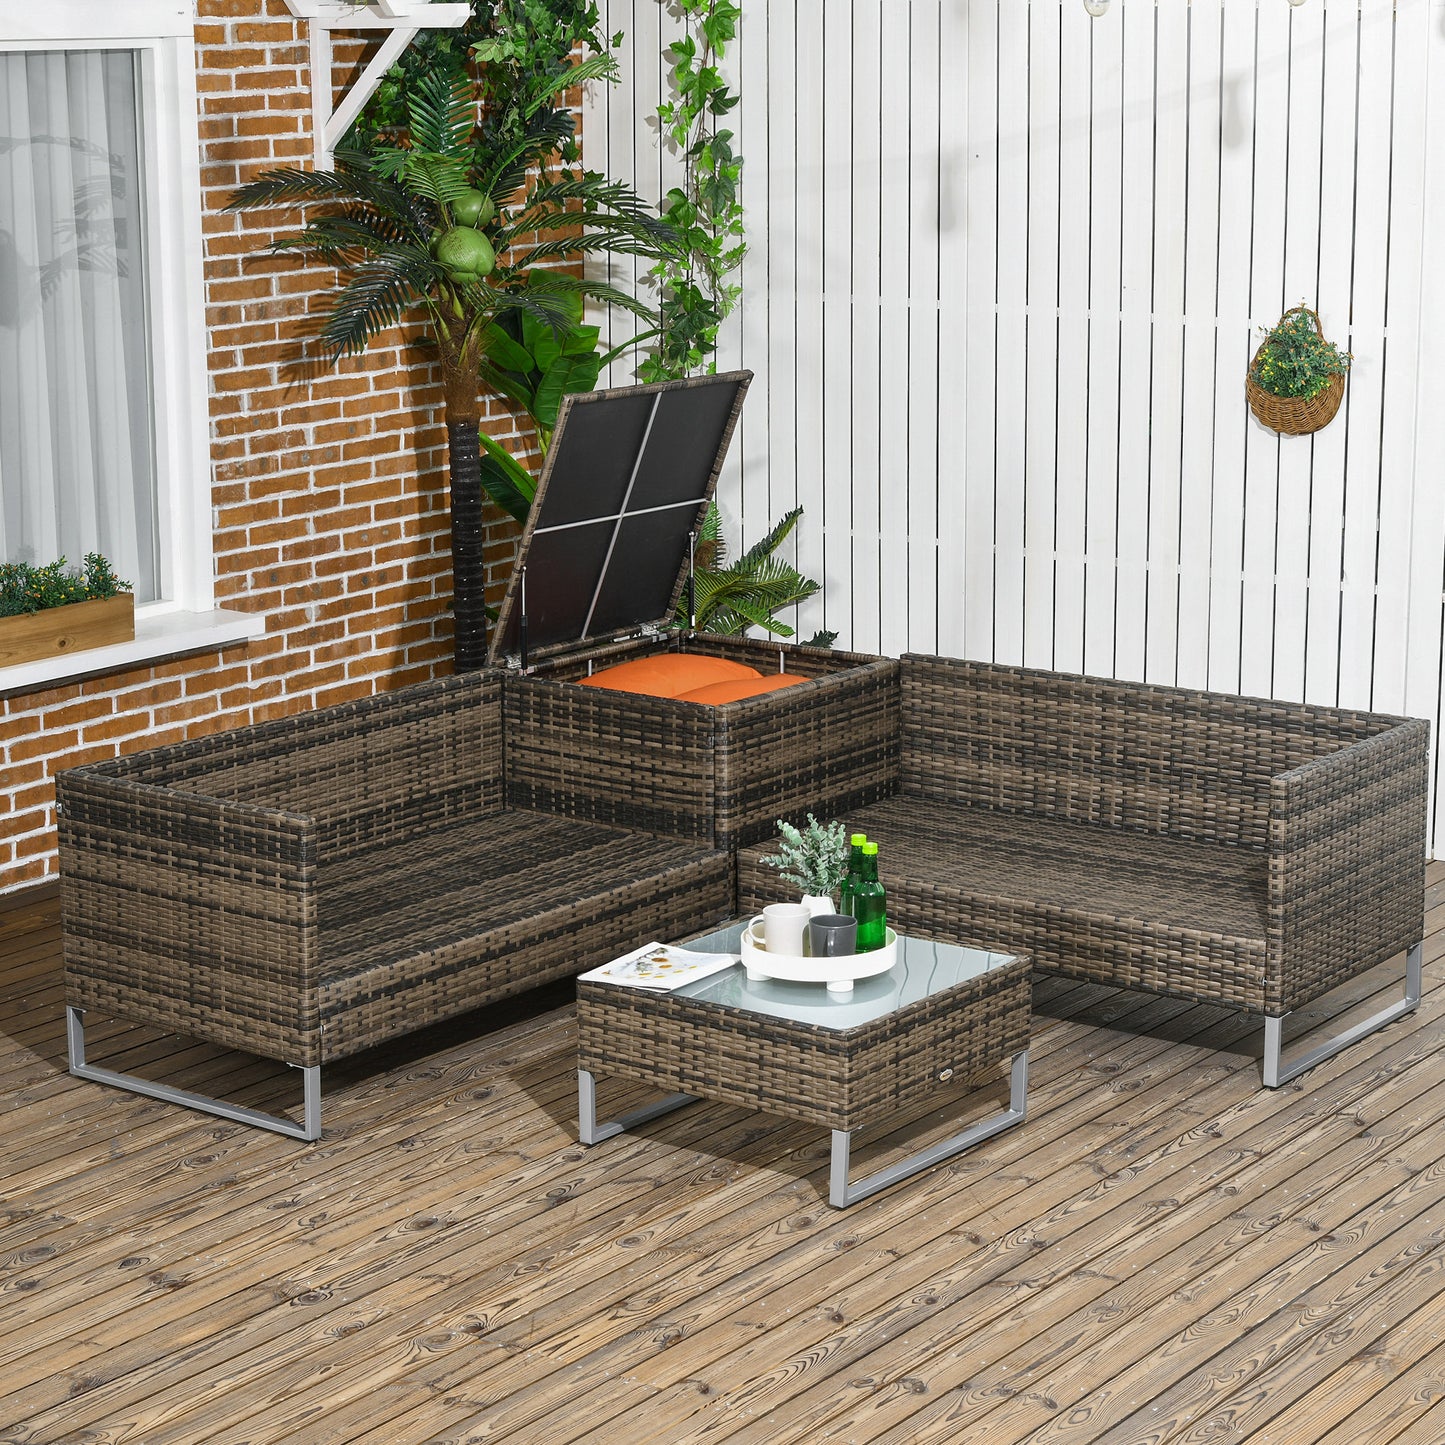 Outsunny 4 PCs Garden Rattan Wicker Outdoor Furniture Patio Corner Sofa Love Seat and Table Set with Cushions Side Desk Storage - Orange